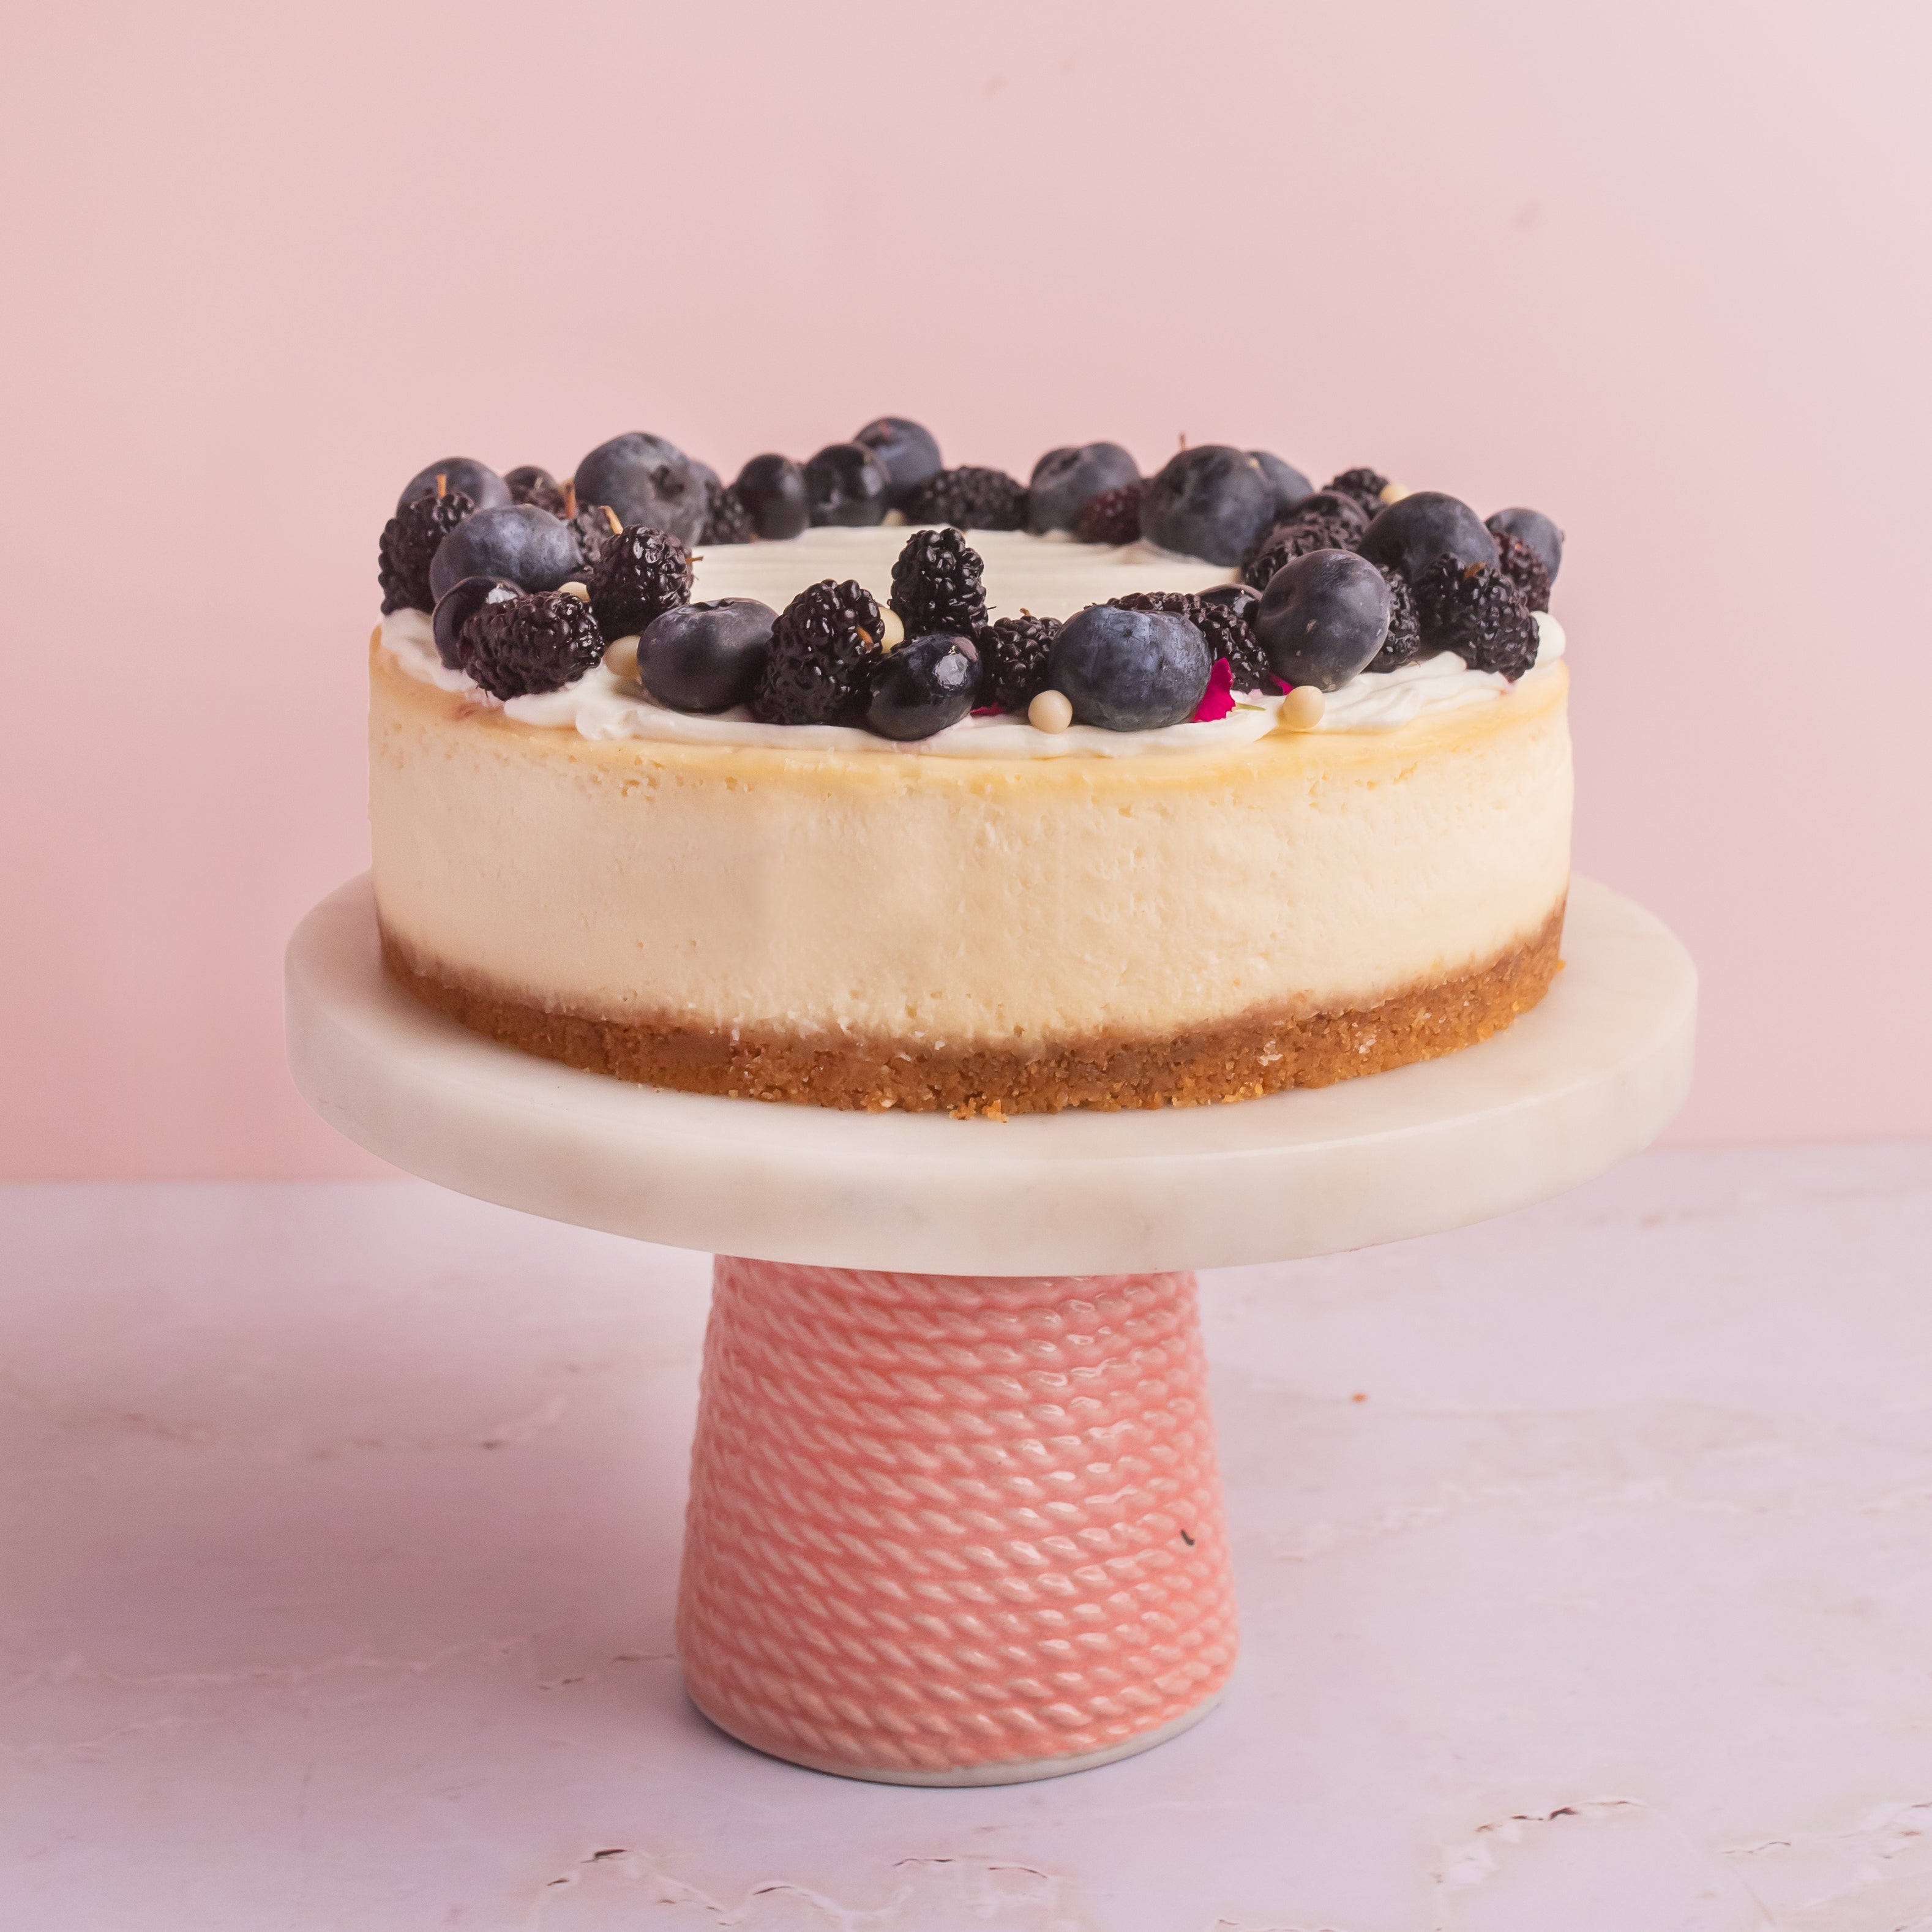 Baked NY Cheesecake with Blueberries - Brownsalt Bakery